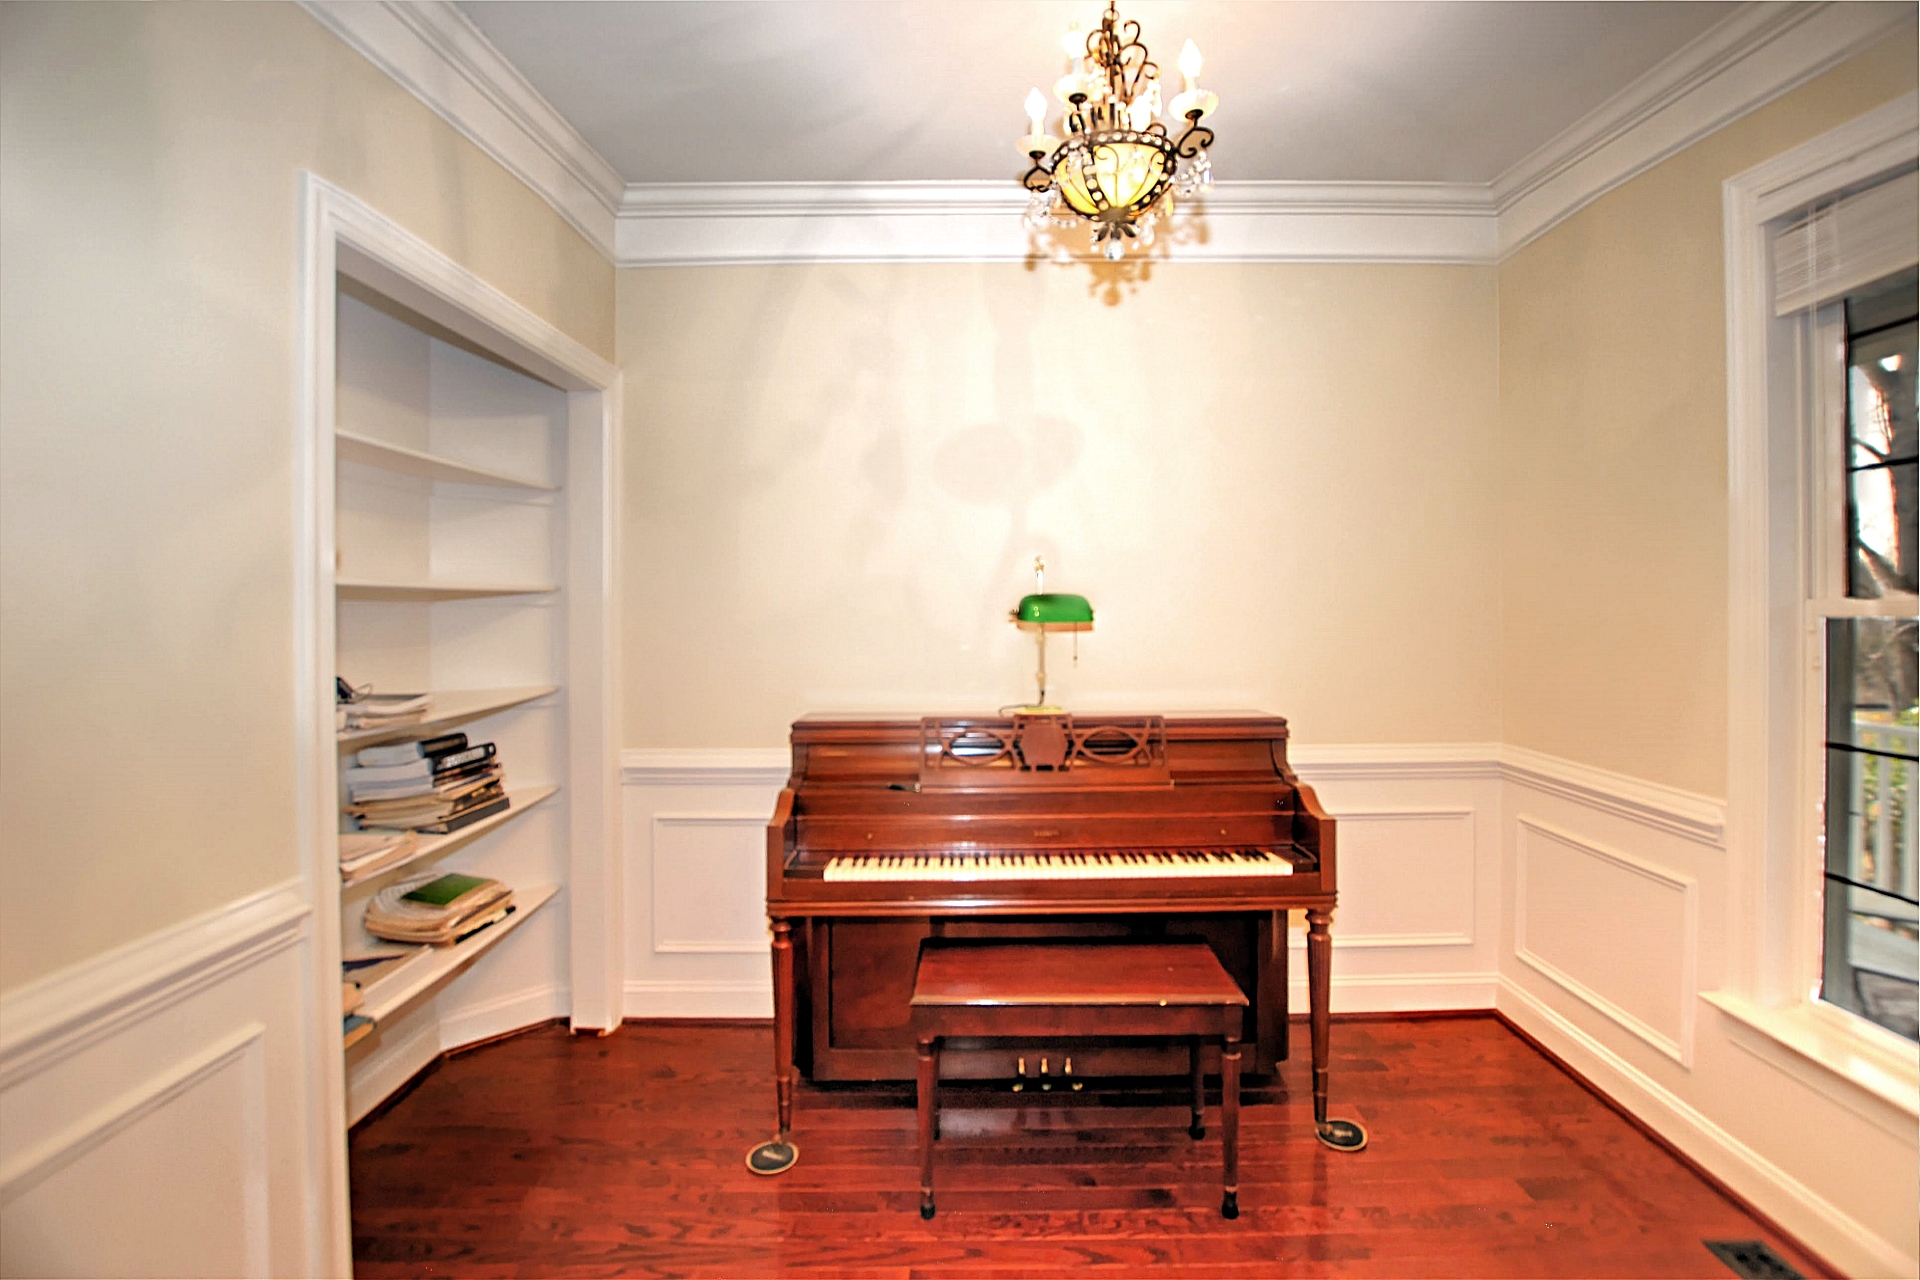 Office or Parlor room off foyer